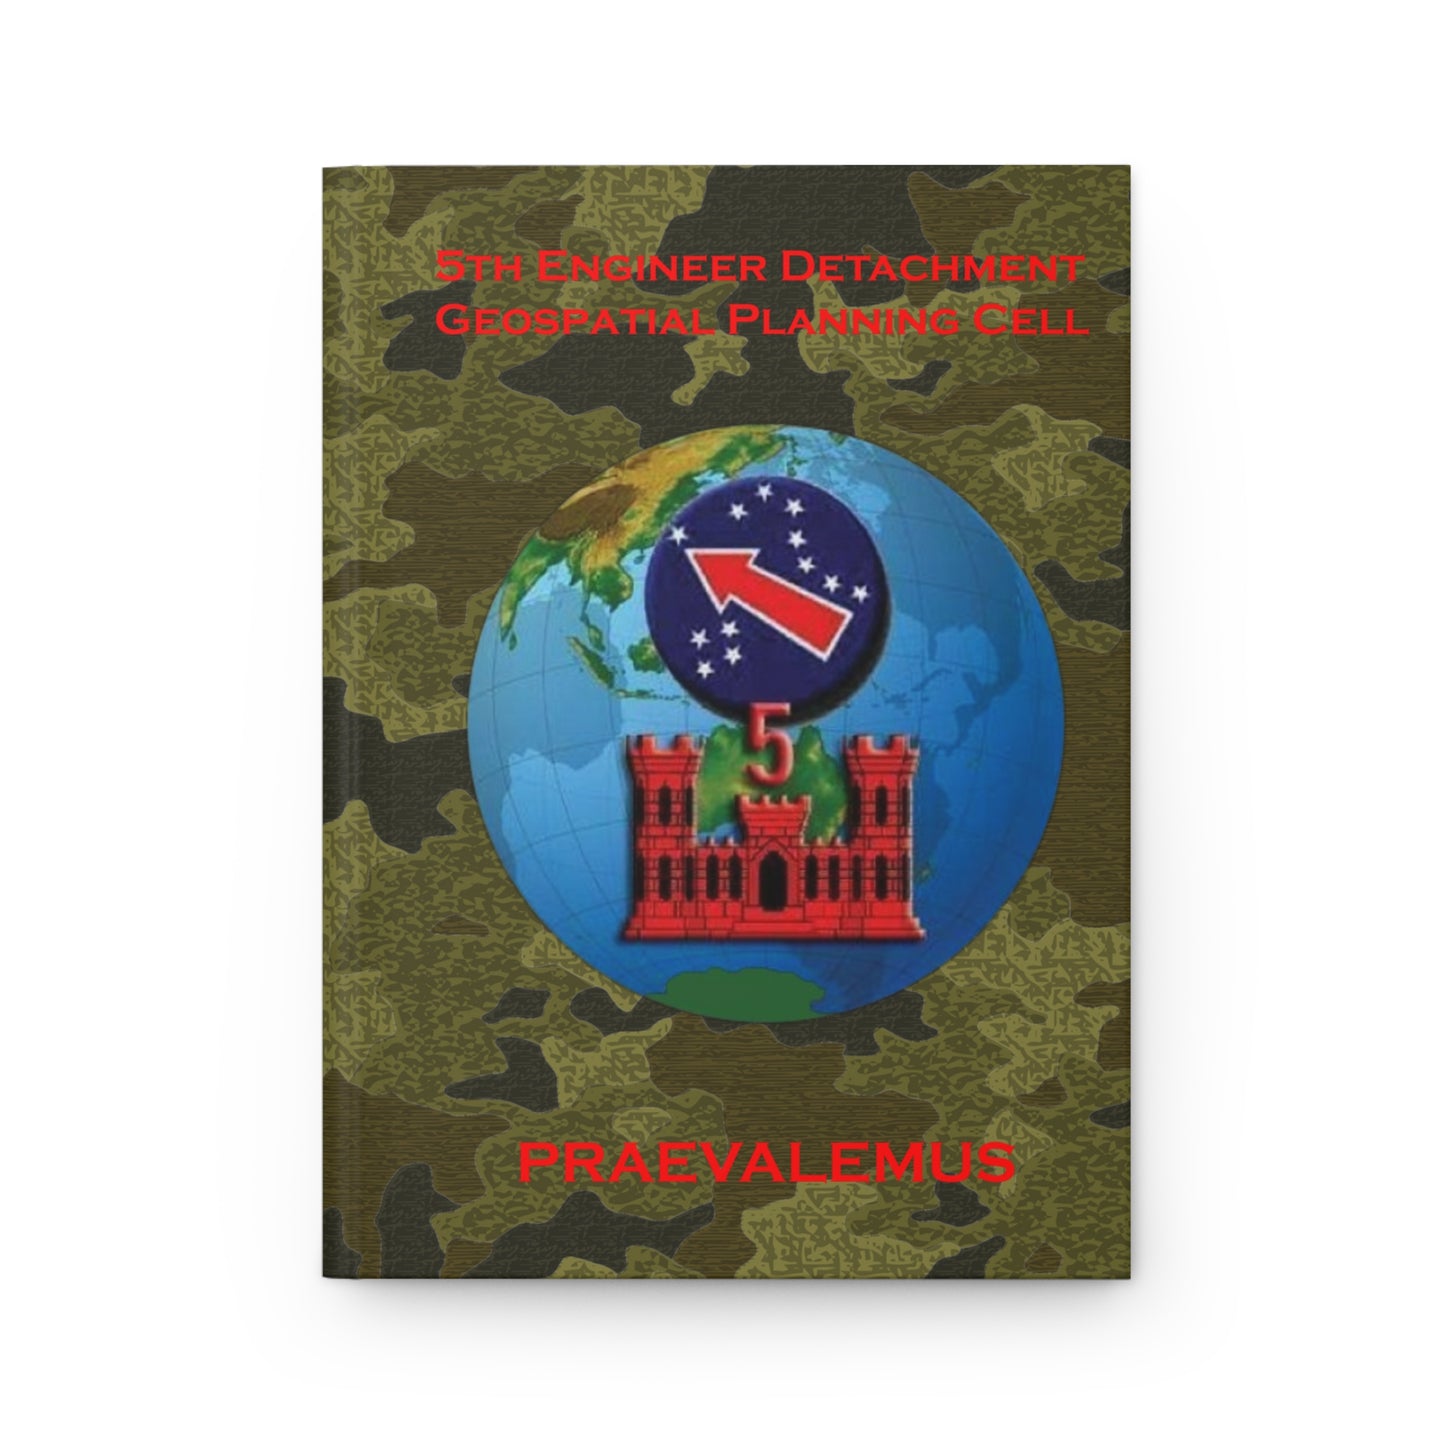 5th Engineer Detachment Geospatial Planning Cell Tiger Camo Hardcover Leader Book